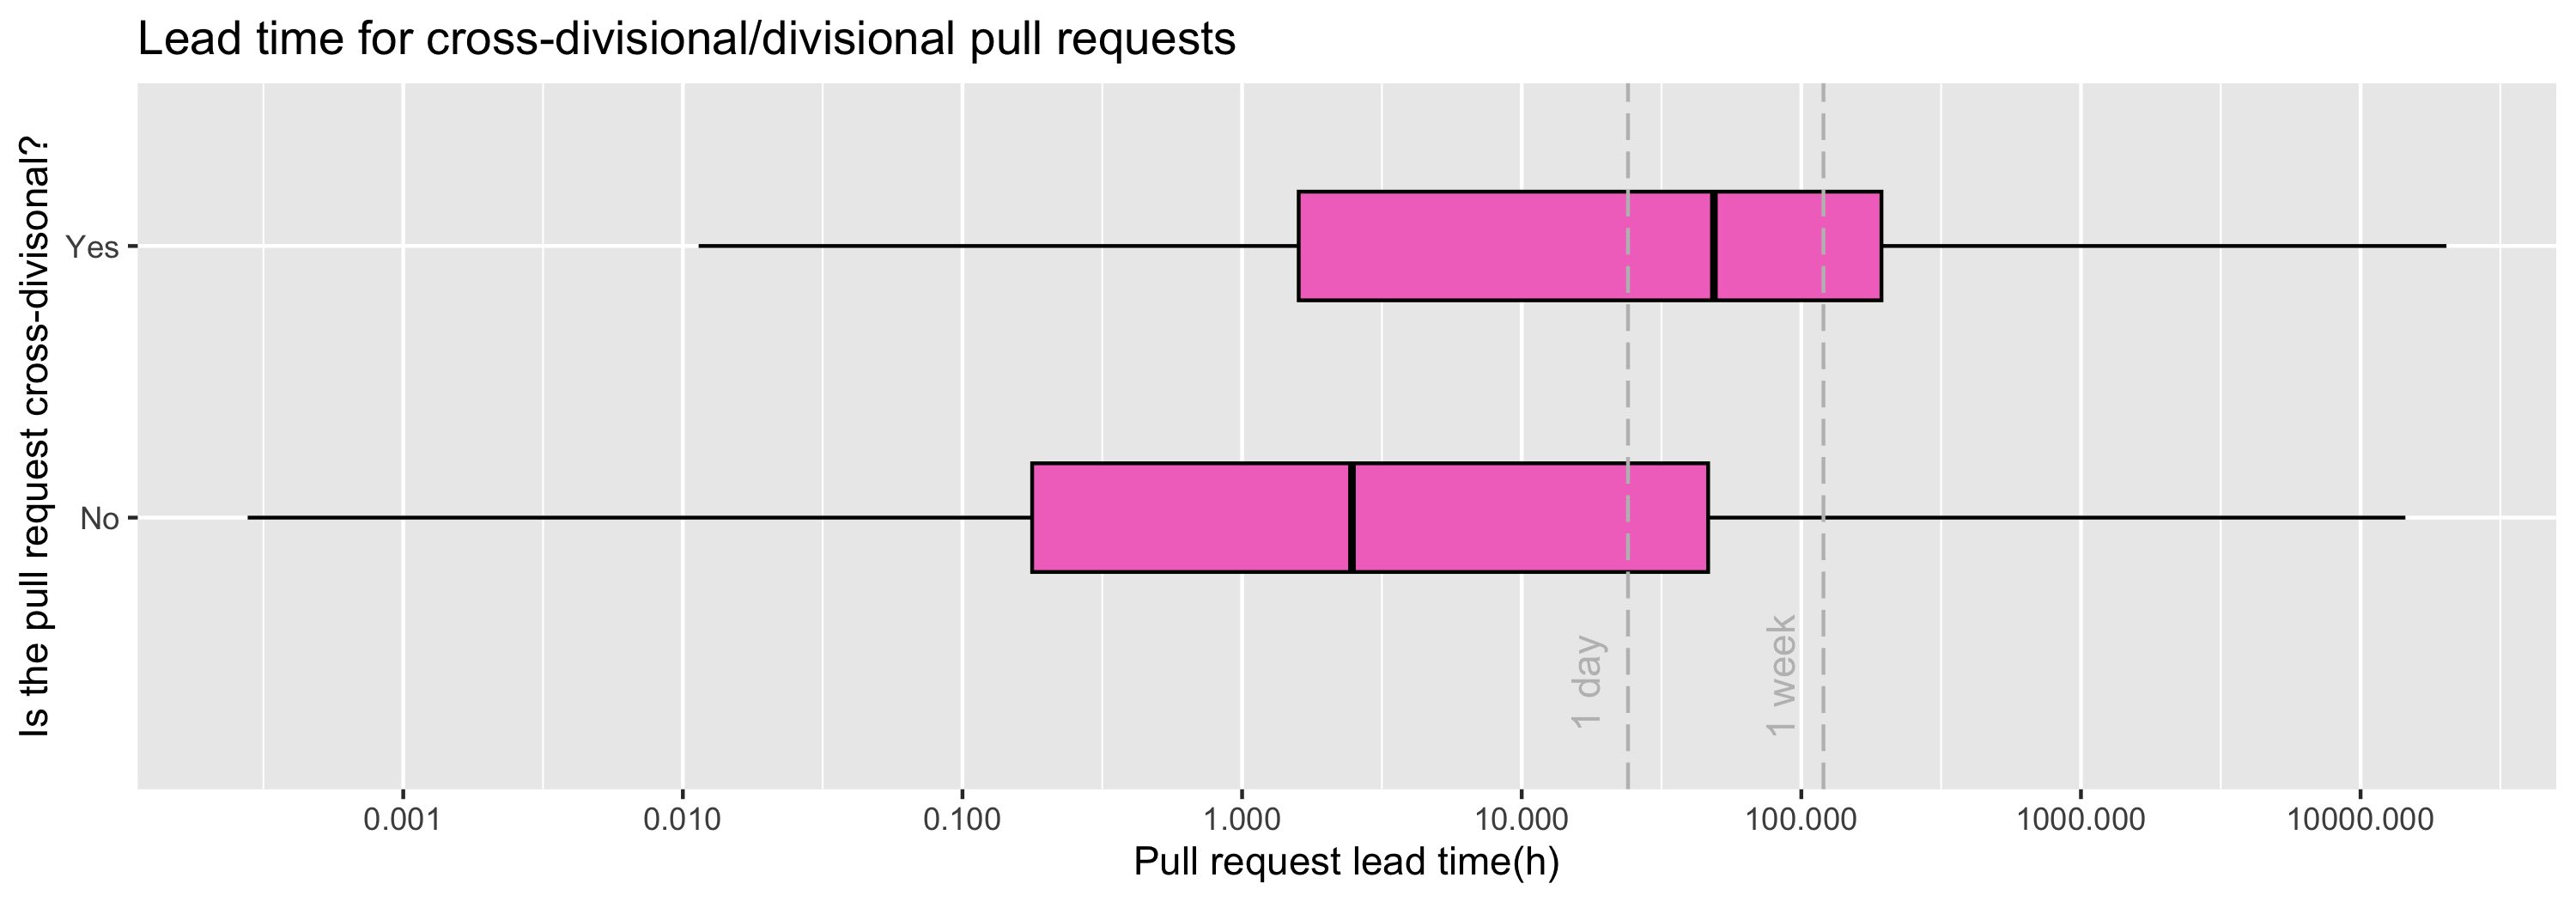 Lead time for cross-divisional/non-cross-divisional pull requests